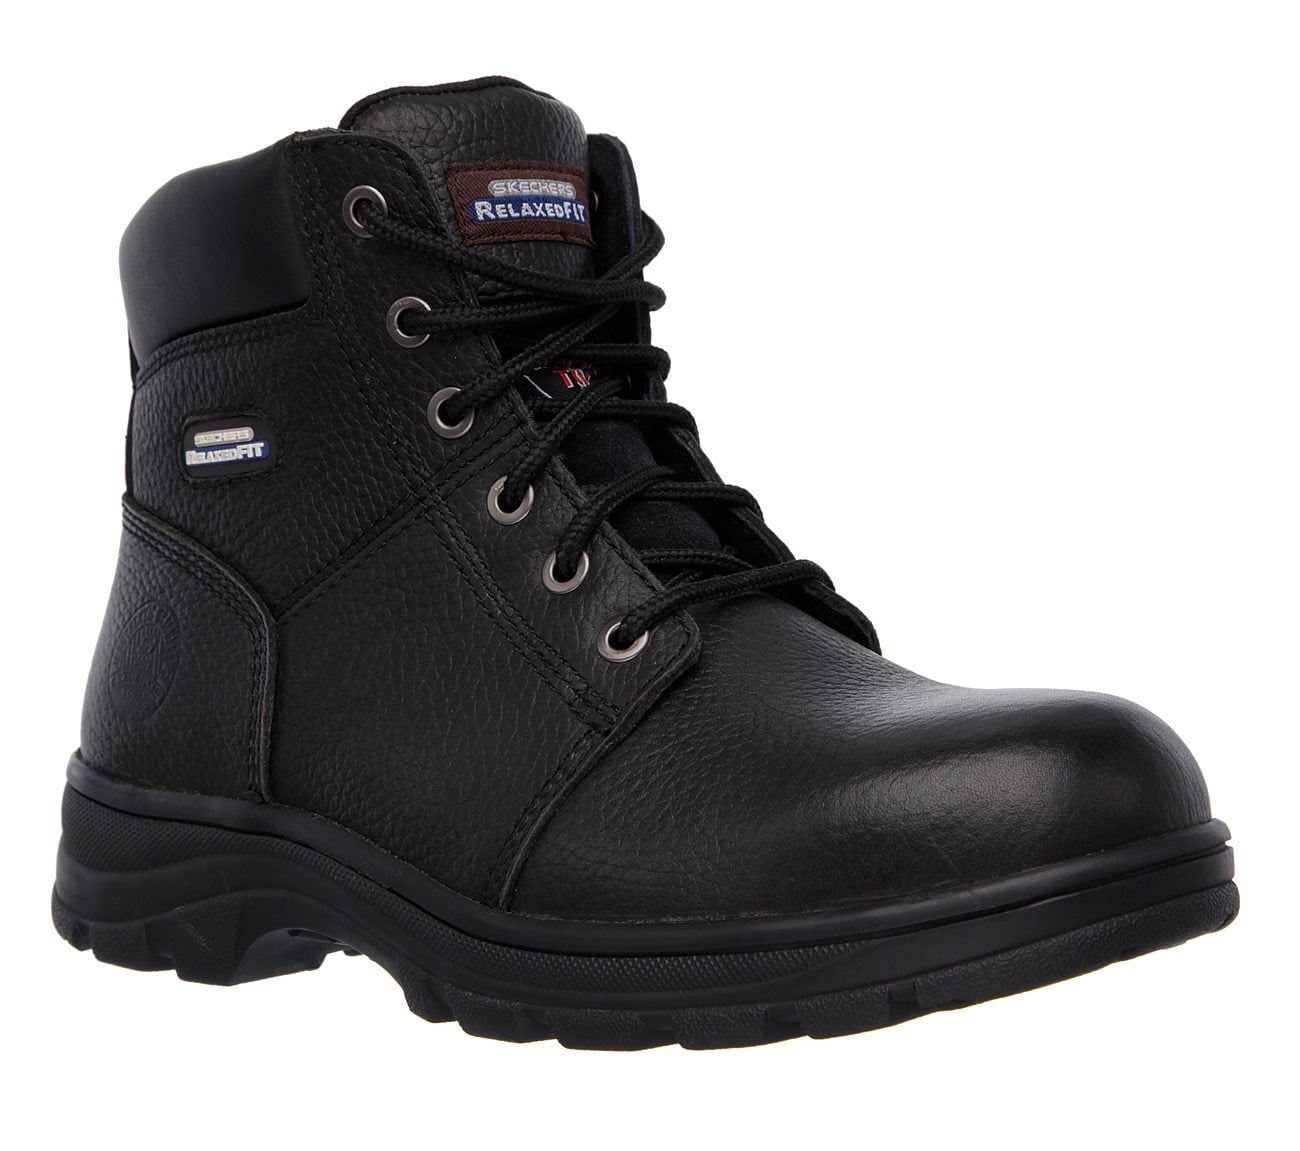 skechers for work men's workshire relaxed fit work steel toe boot